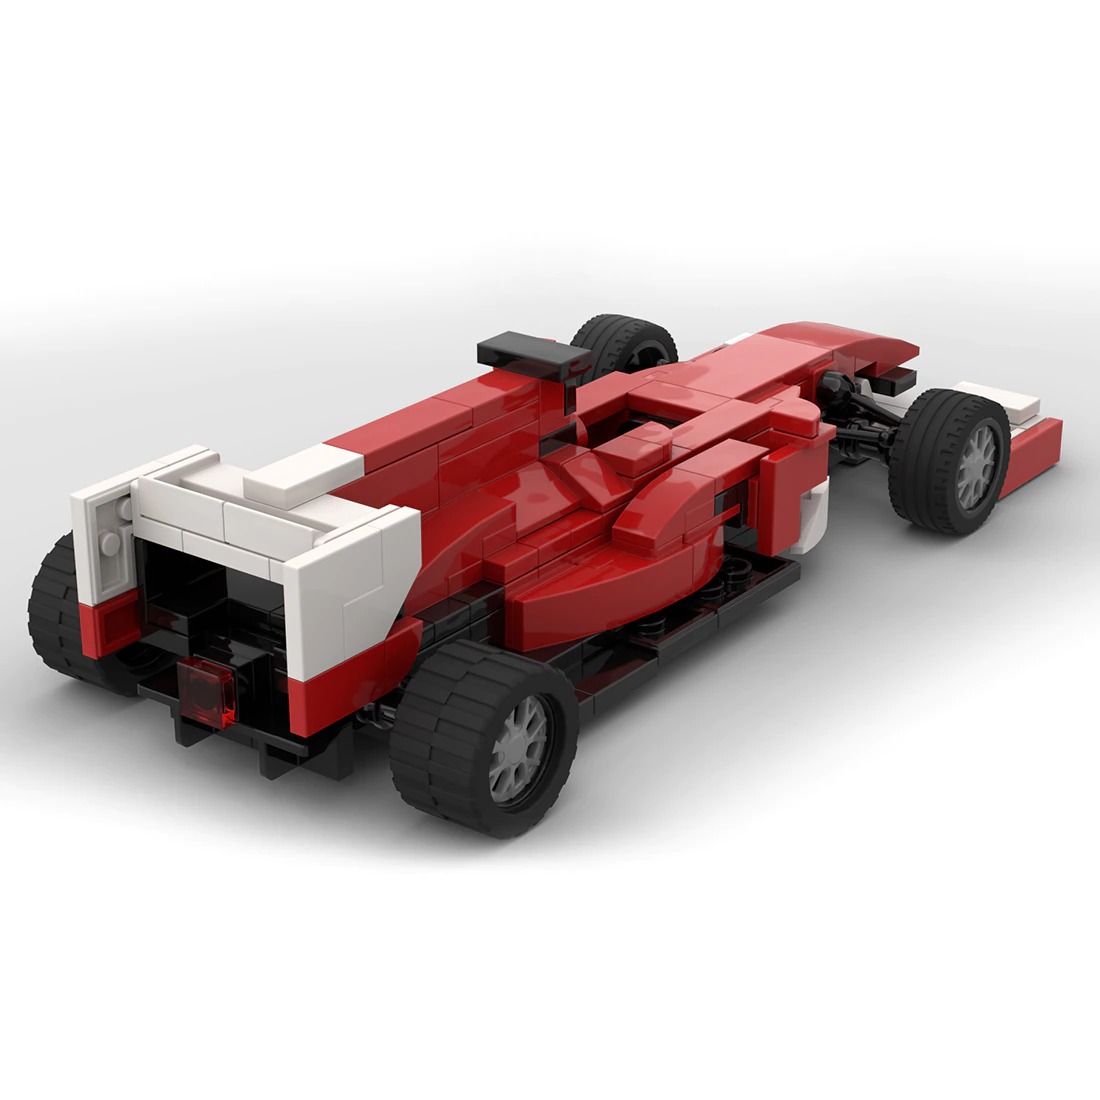 F10 Racing Car MOC-100267 Technic With 250 Pieces